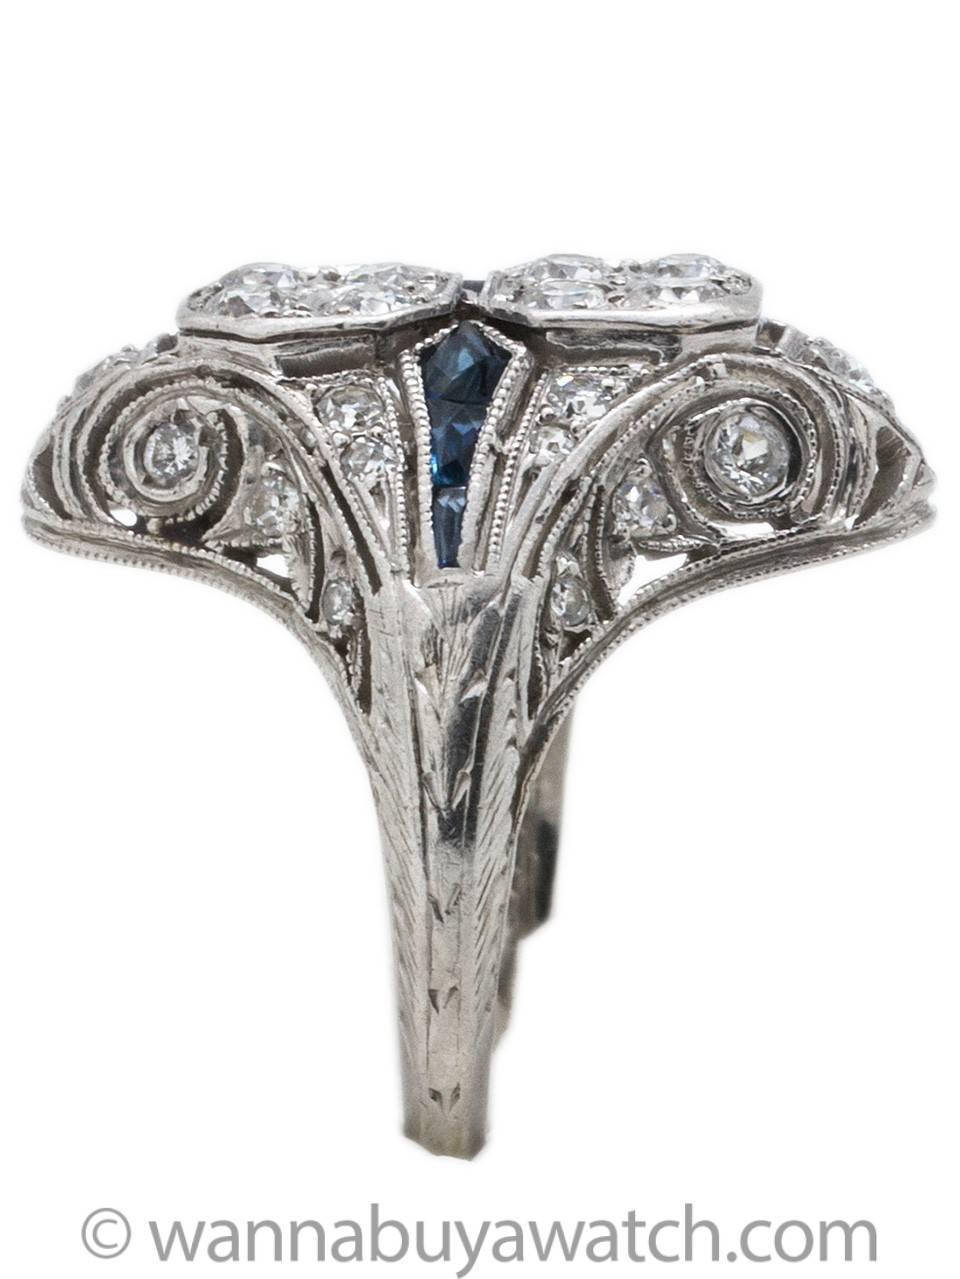 Stunning women’s 1920s Art Deco platinum, diamond and sapphire ring with intricate filigree detailing and craftsmanship.  Eight very bright Old European Cut prong set center diamonds and 22 side diamonds equal total weight of approximately 1.00ct 